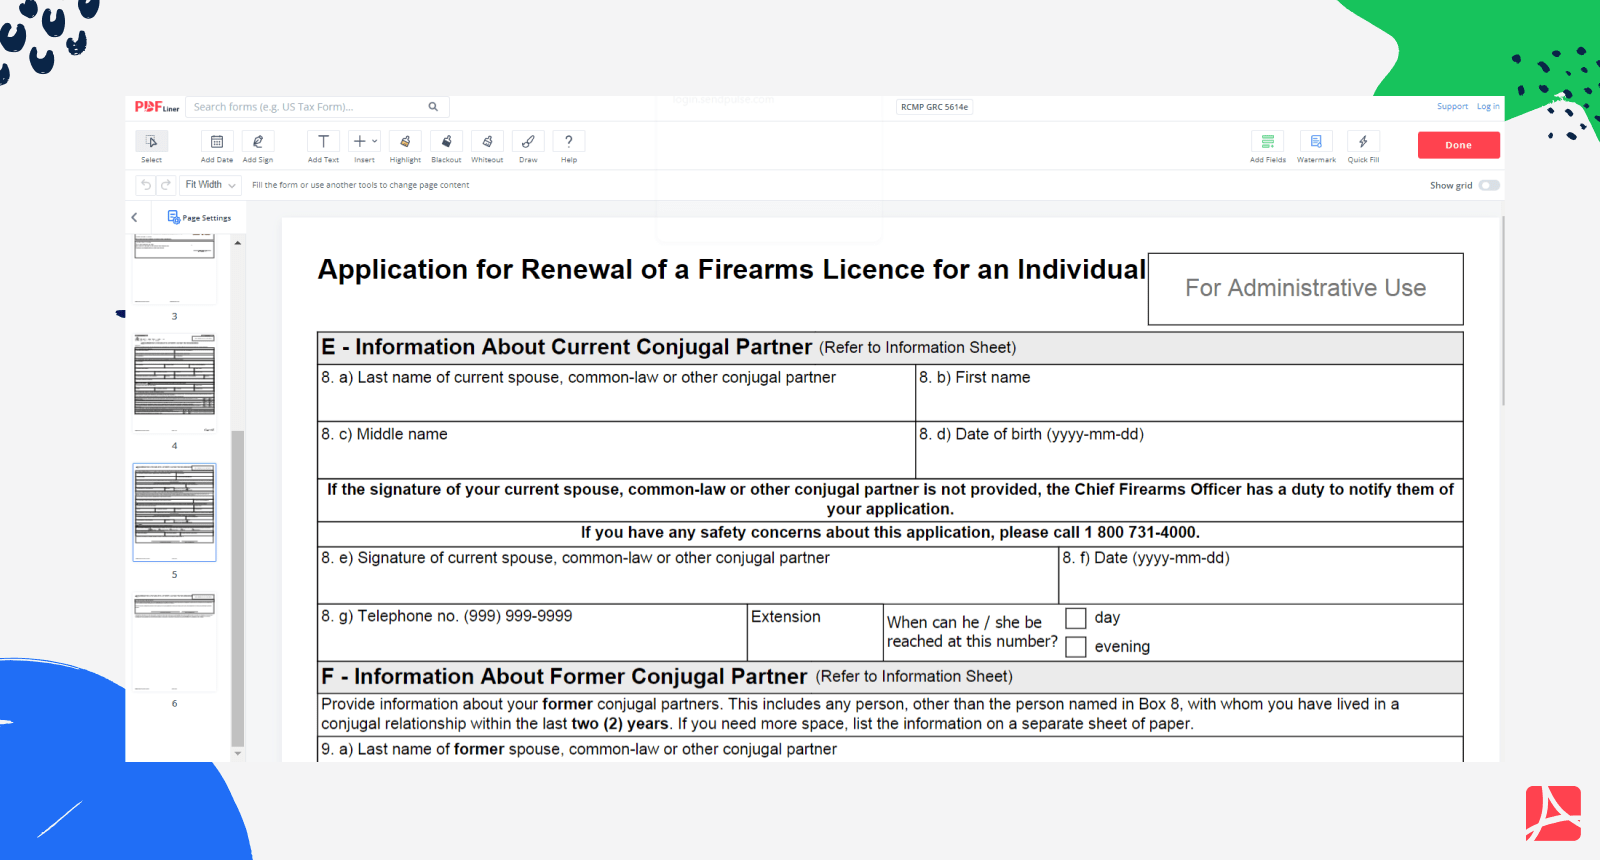 Application for Renewal of a Firearms Licence for an Individual on PDFLiner